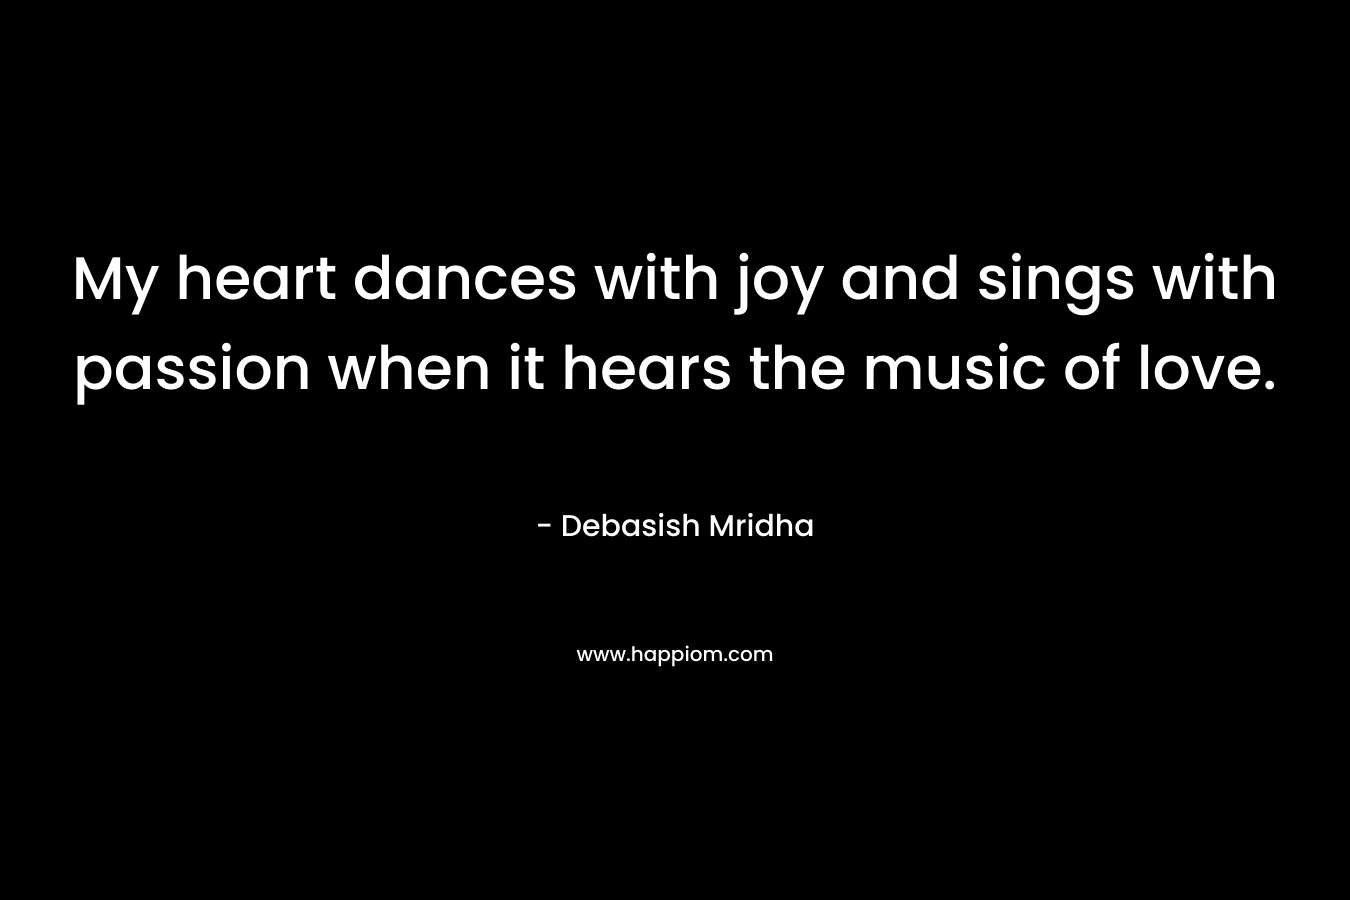 My heart dances with joy and sings with passion when it hears the music of love.